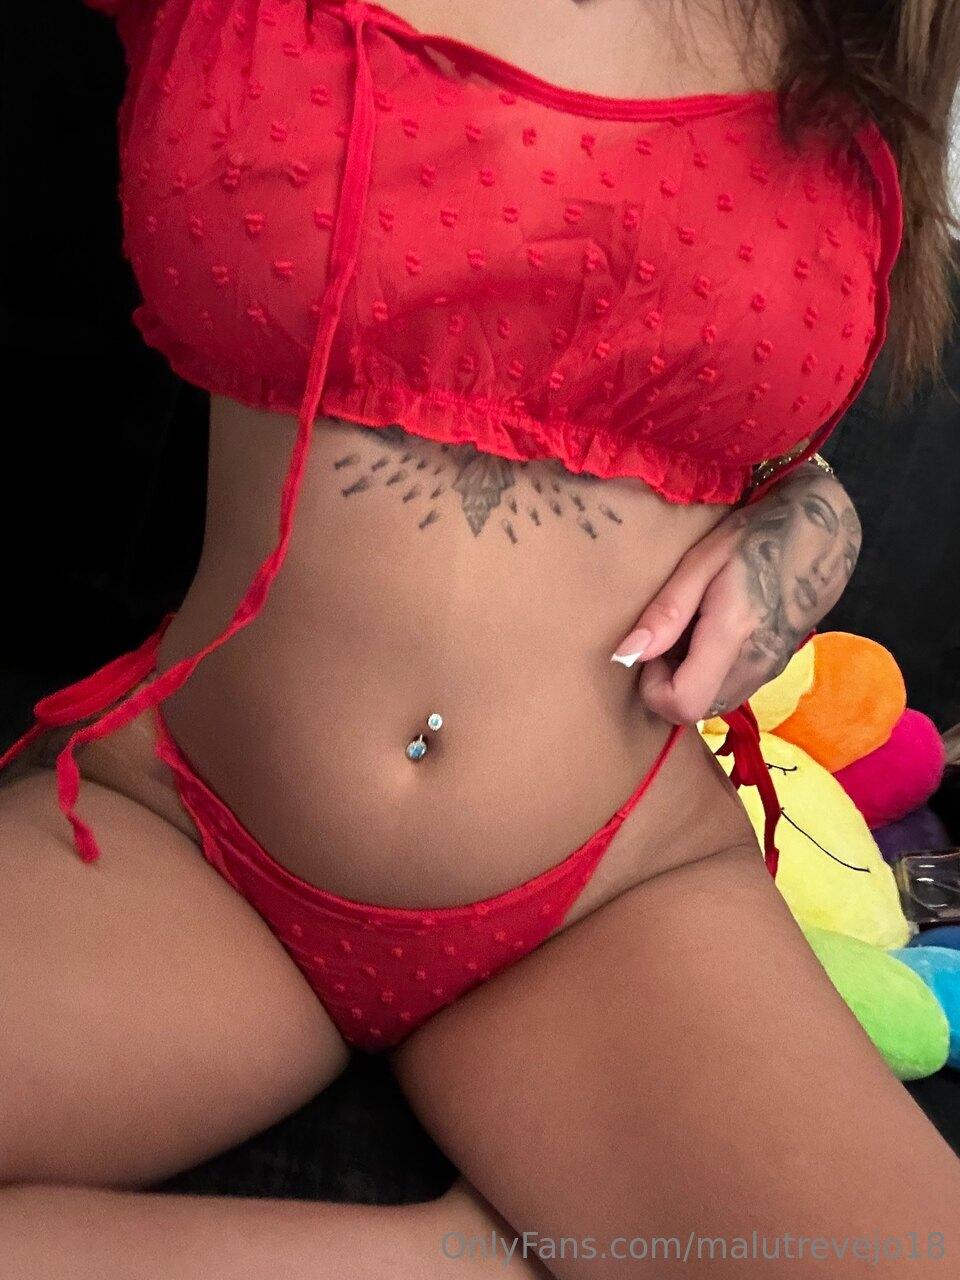 Malu Trevejo Sexy See-Through Red Outfit Onlyfans Set Leaked